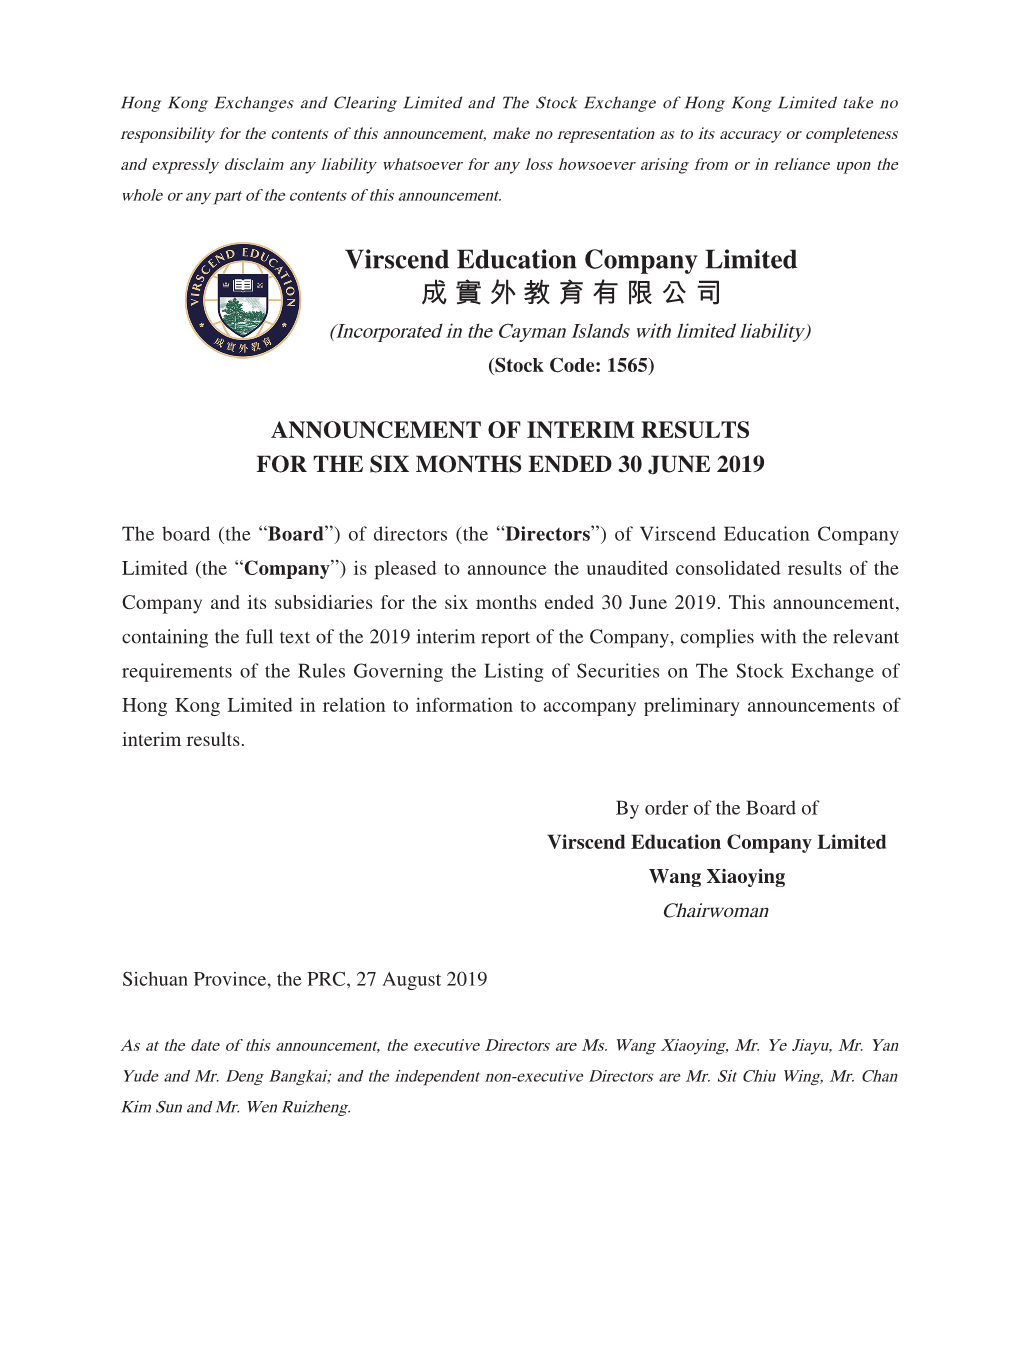 Virscend Education Company Limited 成實外教育有限公司 (Incorporated in the Cayman Islands with Limited Liability) (Stock Code: 1565)